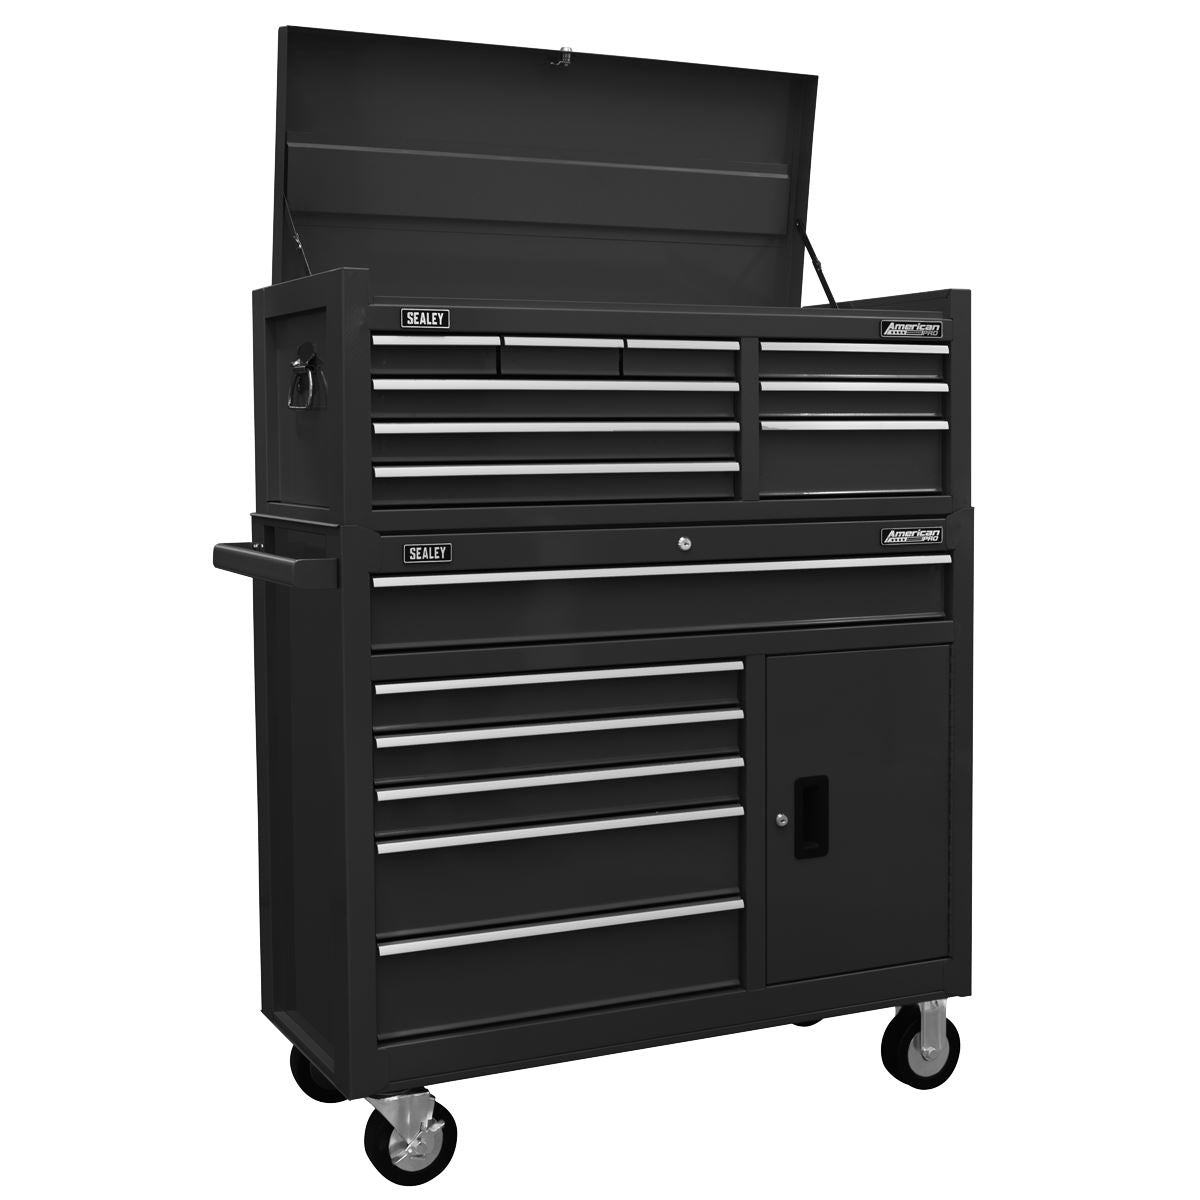 Sealey American Pro Topchest 9 Drawer with Ball Bearing Slides - Black